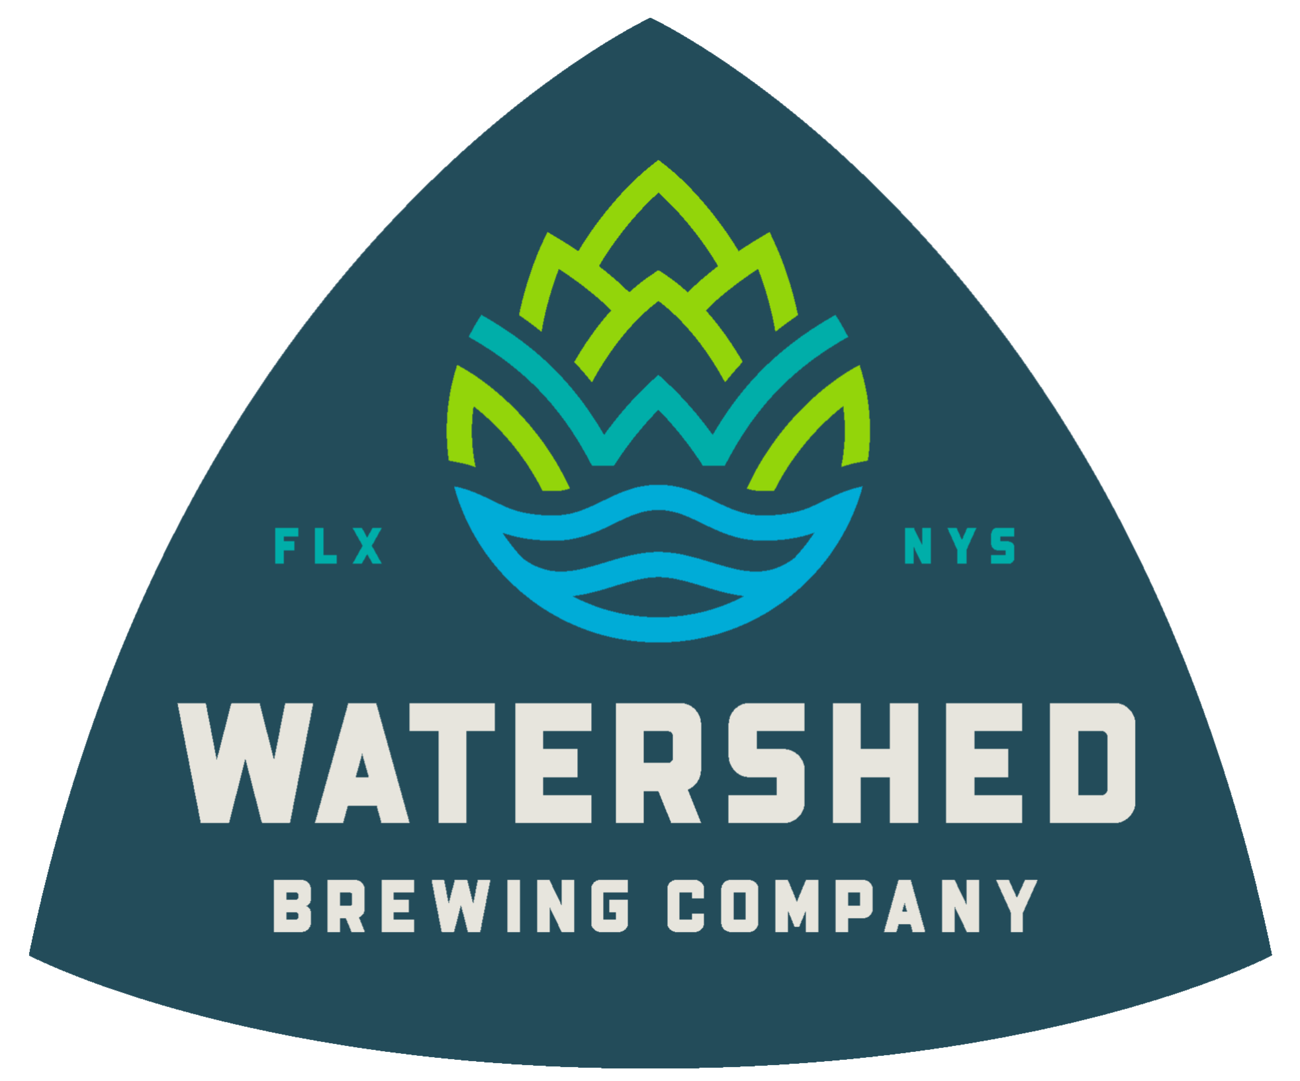 Watershed Brewing Company